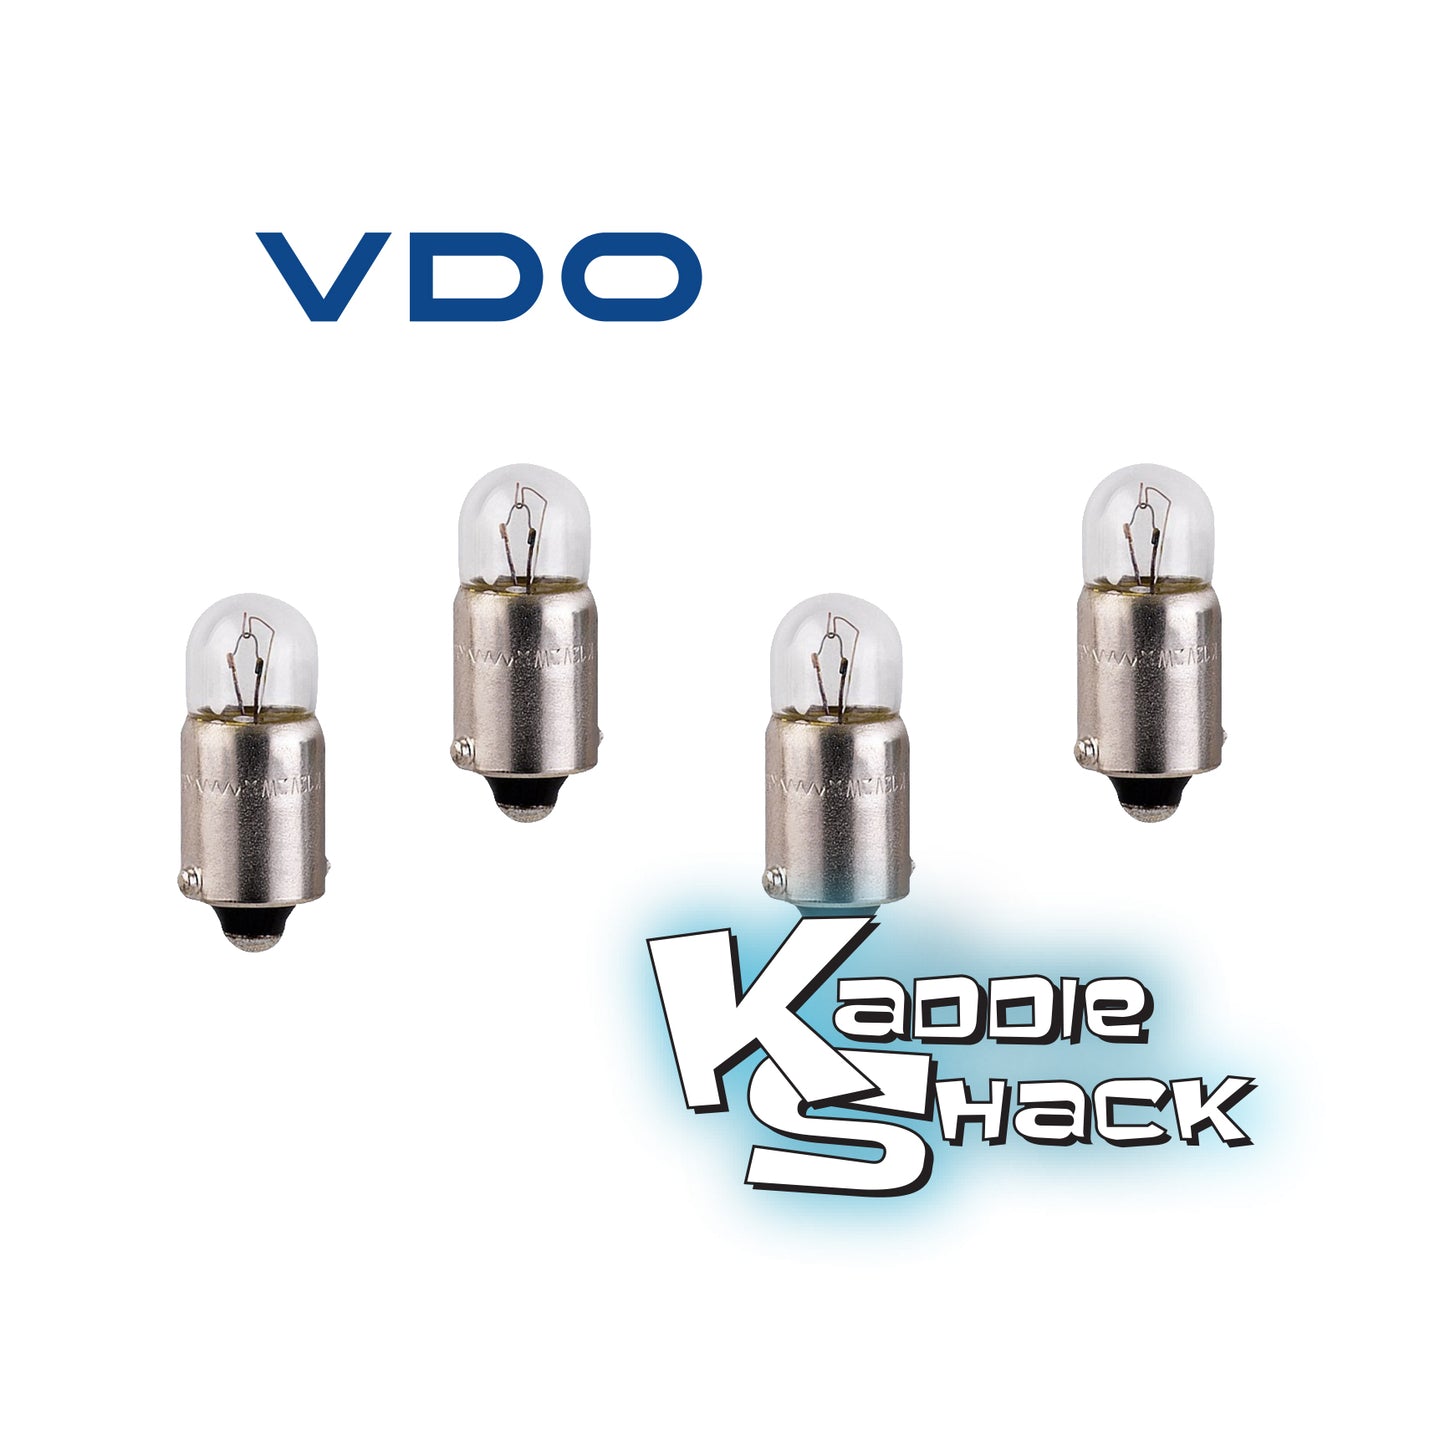 VDO Replacement Dash and Gauge Bulbs, 4-Pack 11/32"